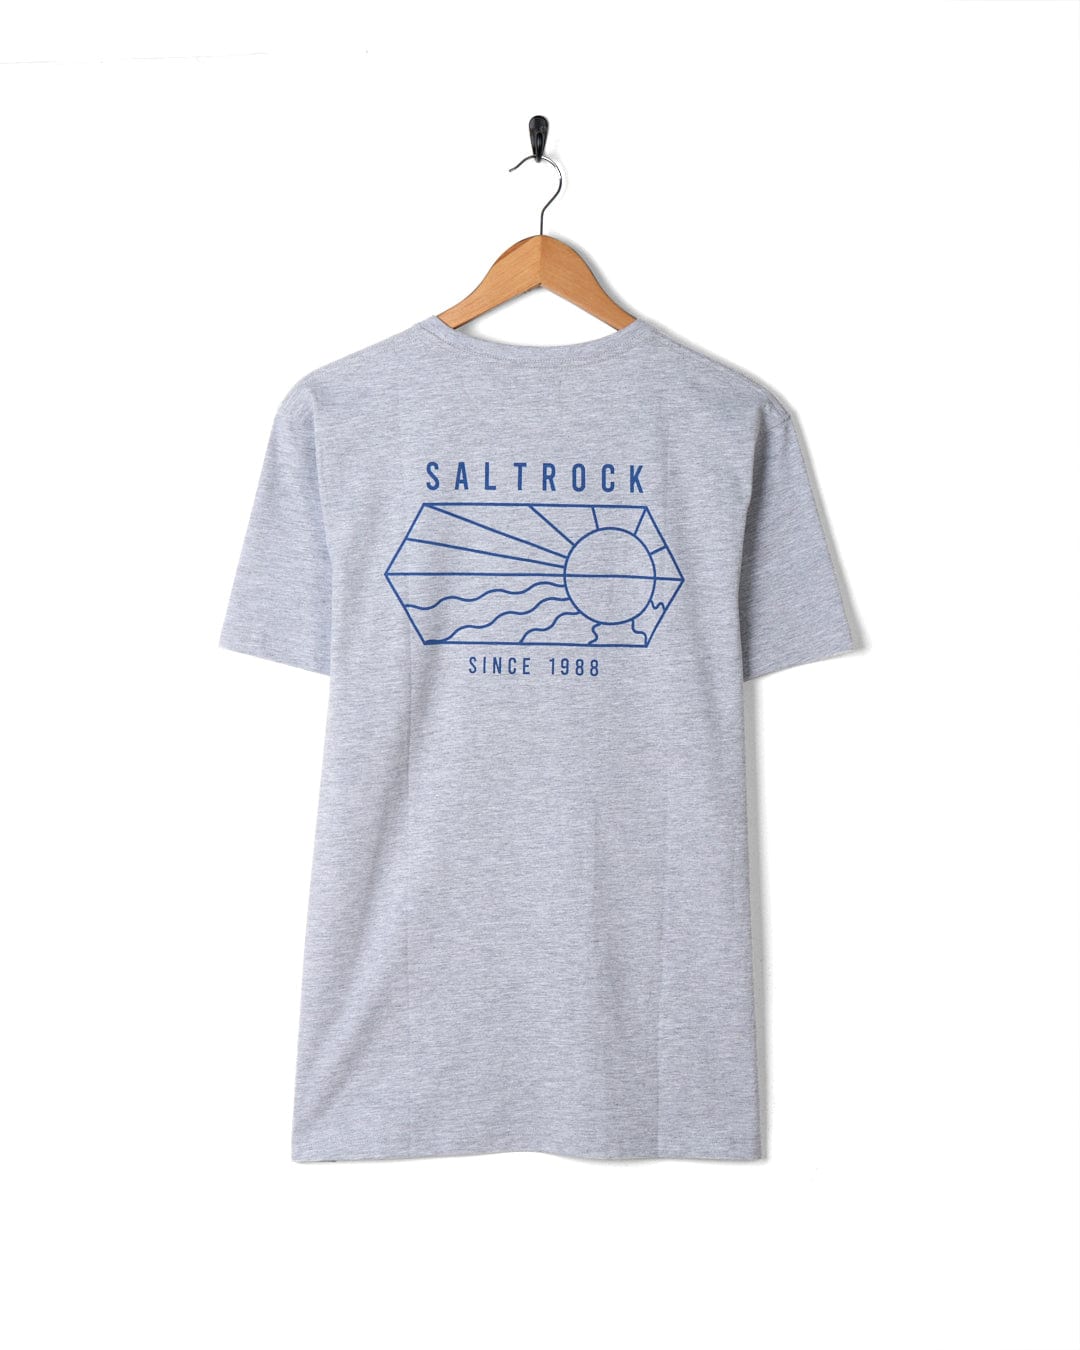 A Saltrock grey t-shirt with a blue logo, made of soft material.